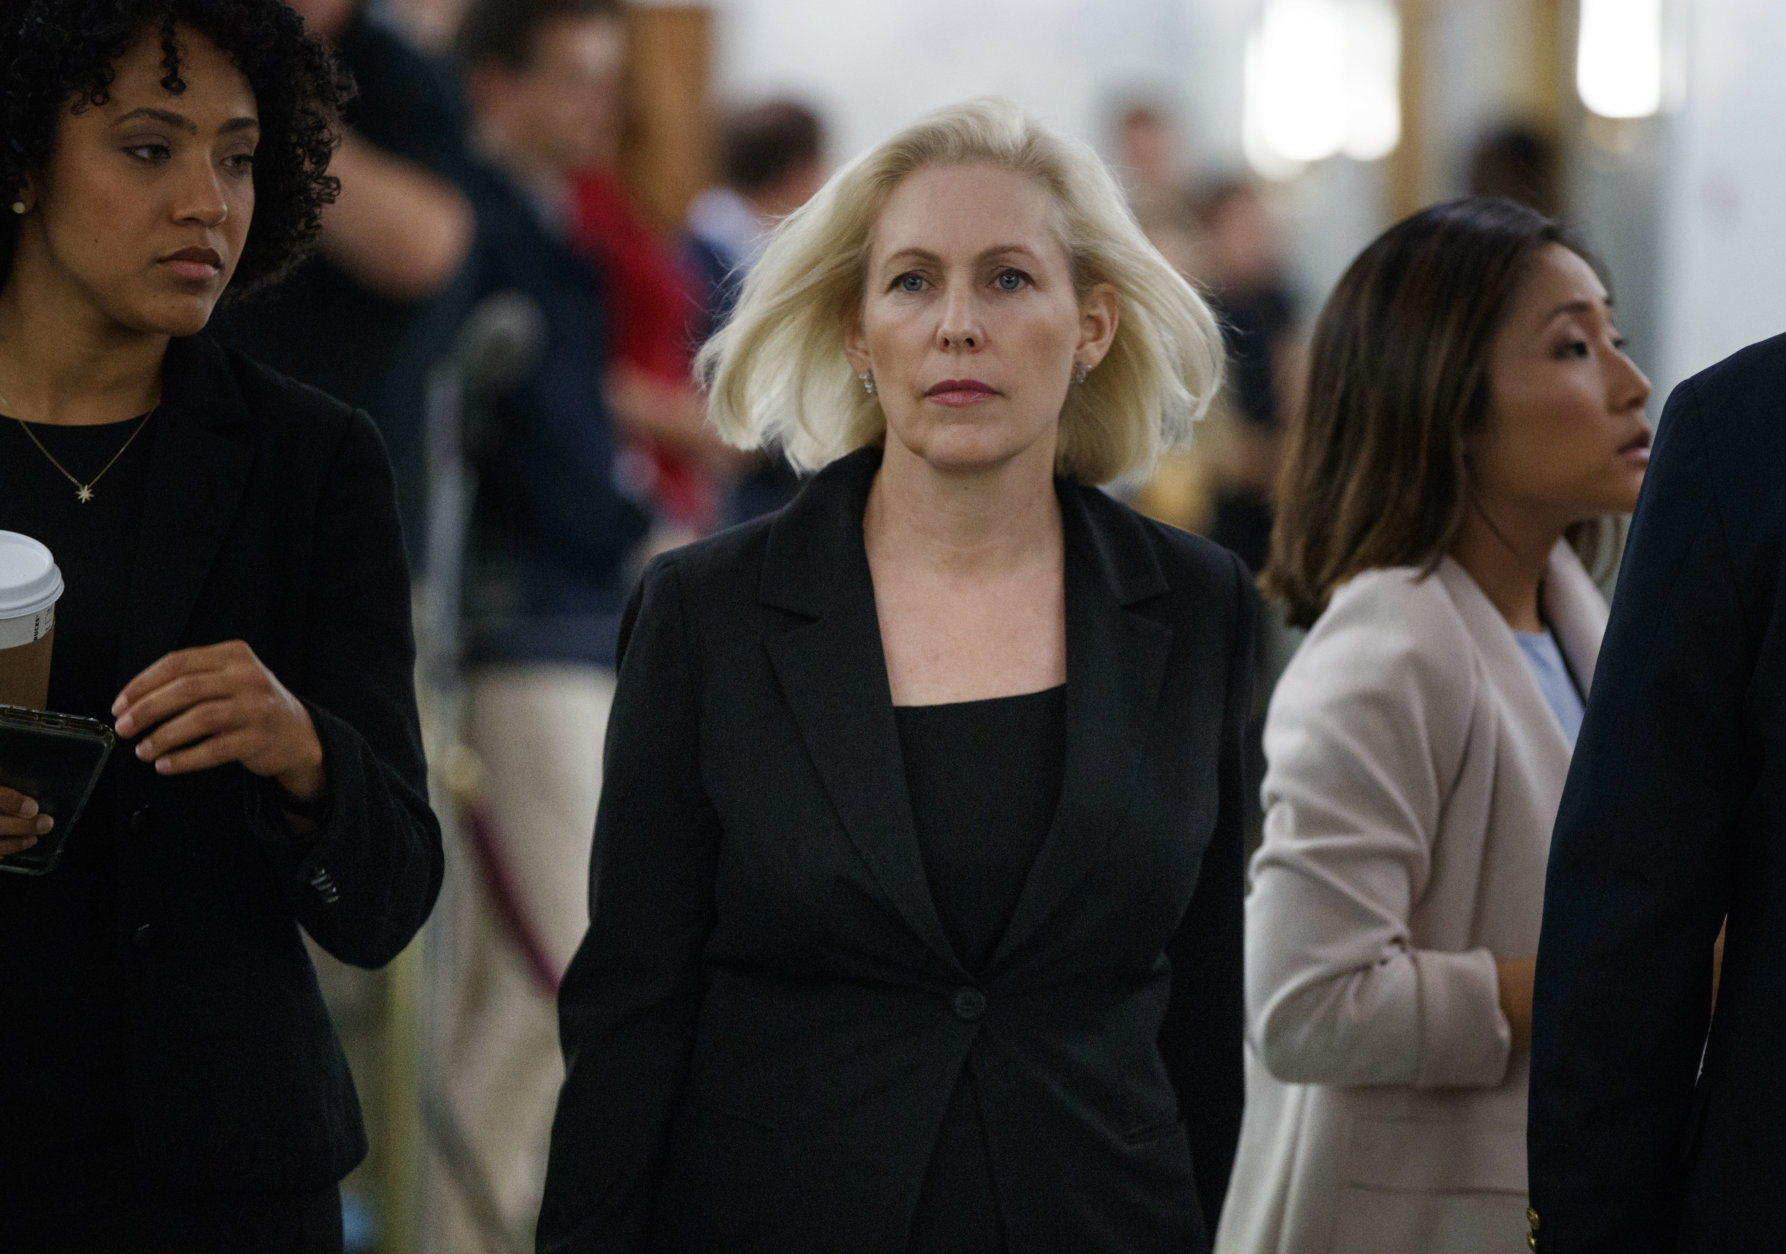 Sen. Kirsten Gillibrand, D-N.Y., walks outside the hearing room during a break in a Senate Judiciary Committee hearing on Capitol Hill in Washington, Thursday, Sept. 27, 2018, with Christine Blasey Ford and Supreme Court nominee Brett Kavanaugh. (AP Photo/Carolyn Kaster)